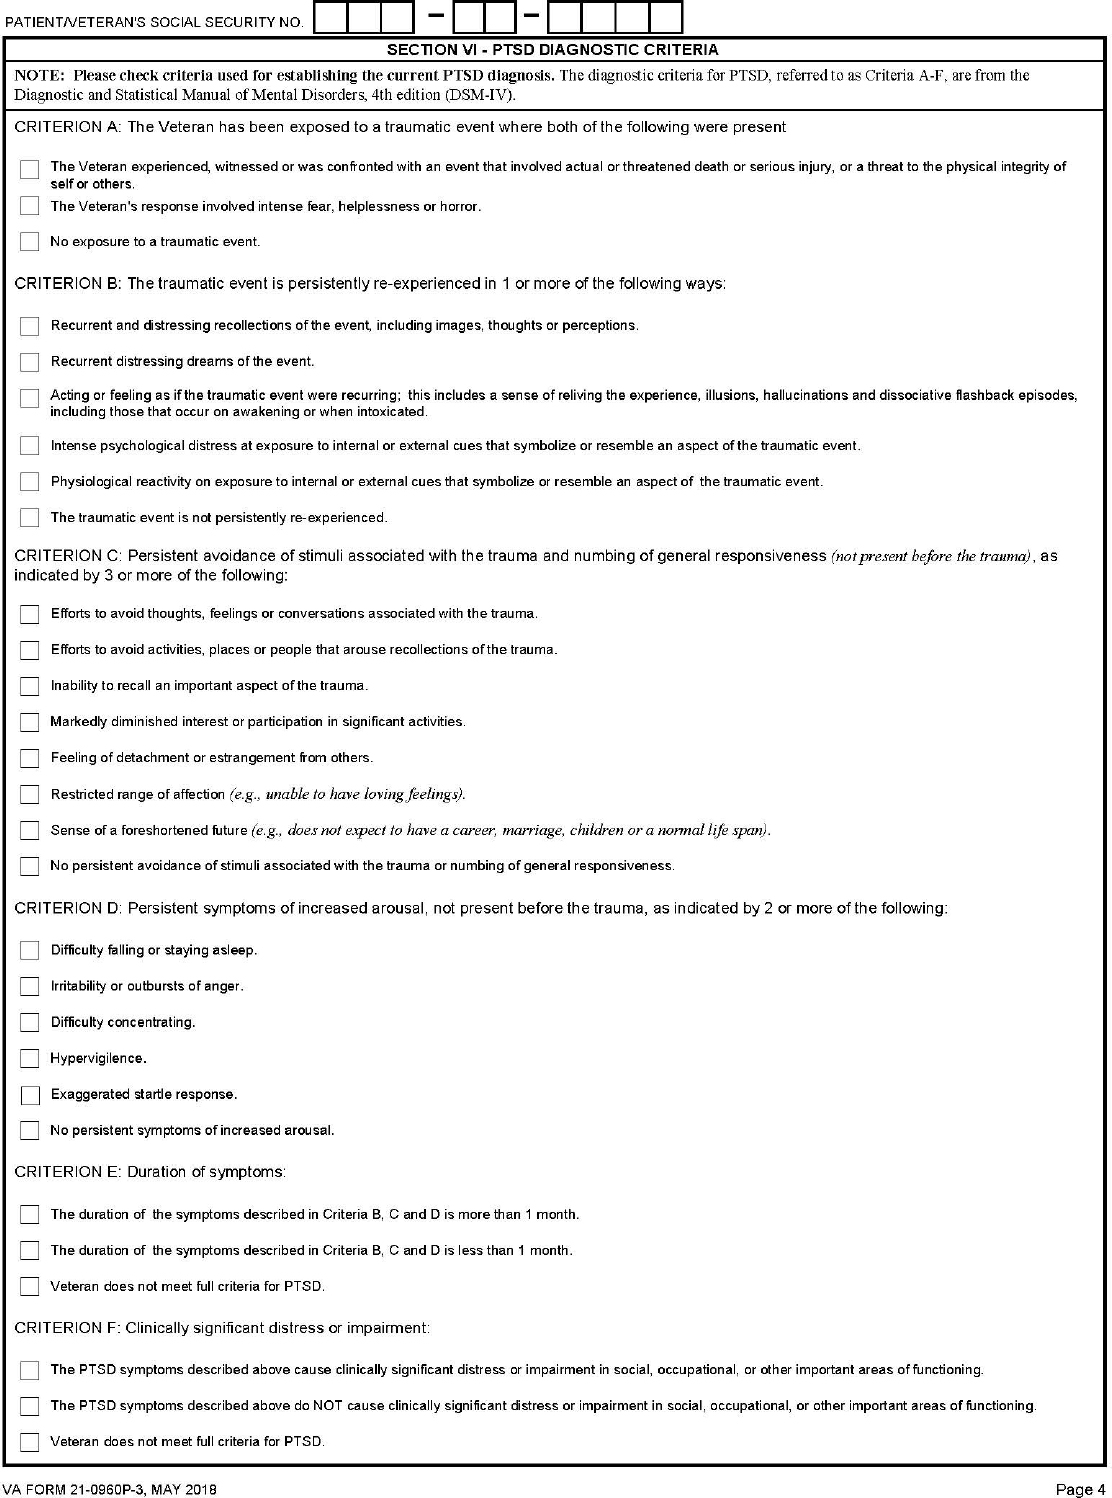 Appendix J Review Posttraumatic Stress Disorder Ptsd Disability Benefits Questionnaire Evaluation Of The Disability Determination Process For Traumatic Brain Injury In Veterans The National Academies Press